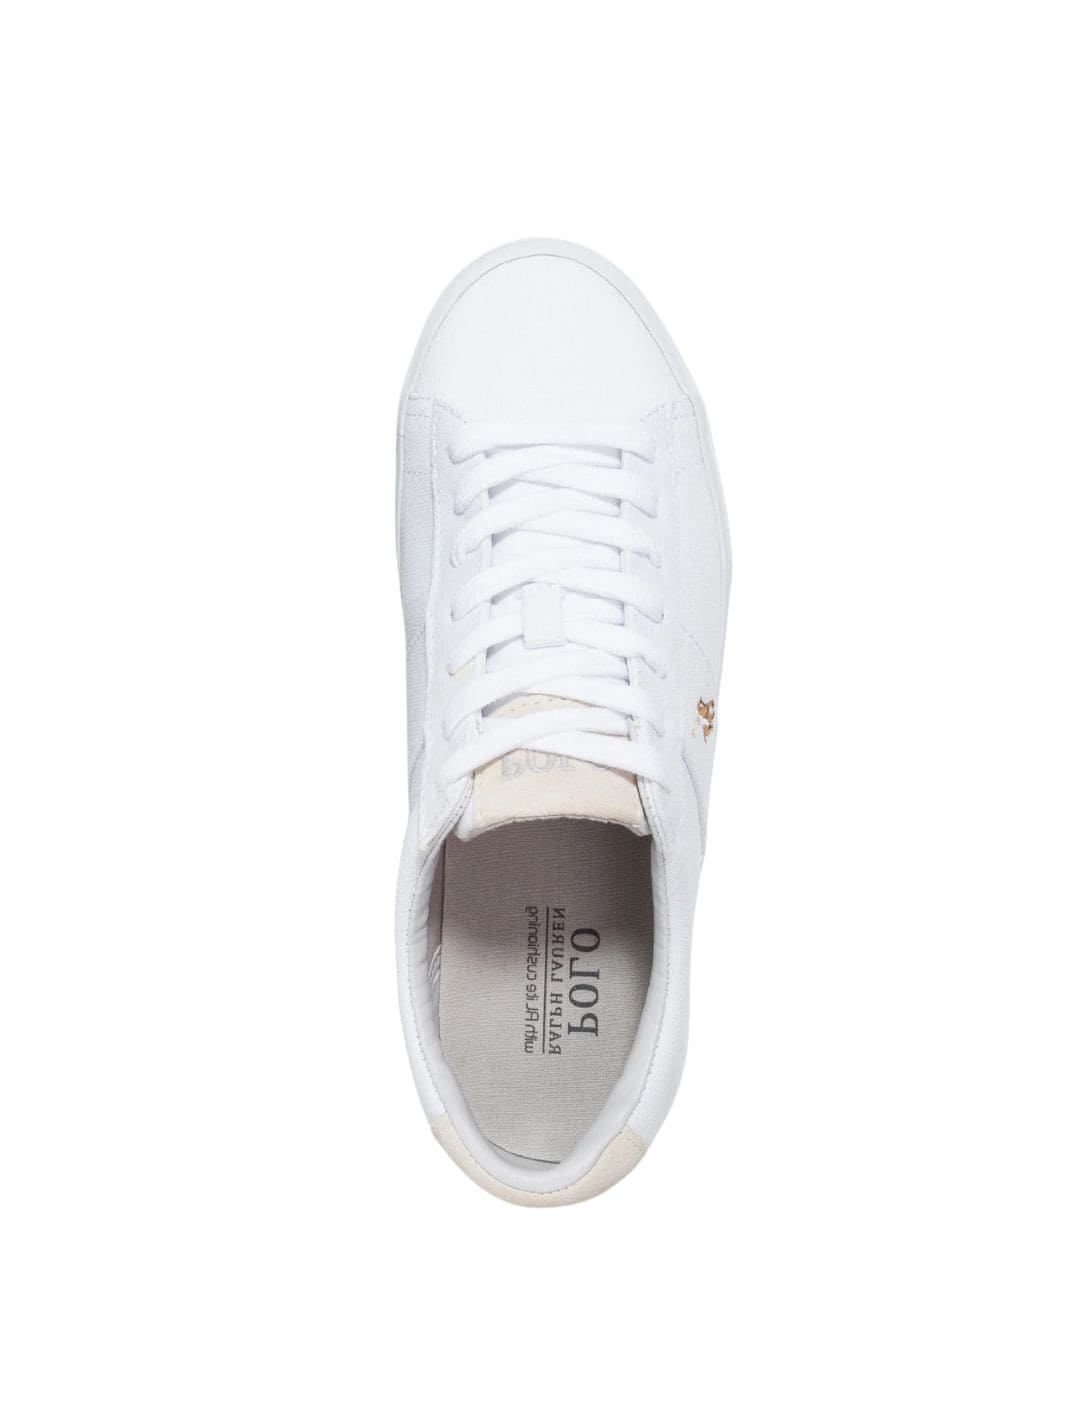 Polo Ralph Lauren Shoes Sneakers | Sayer Canvas Sneakers White